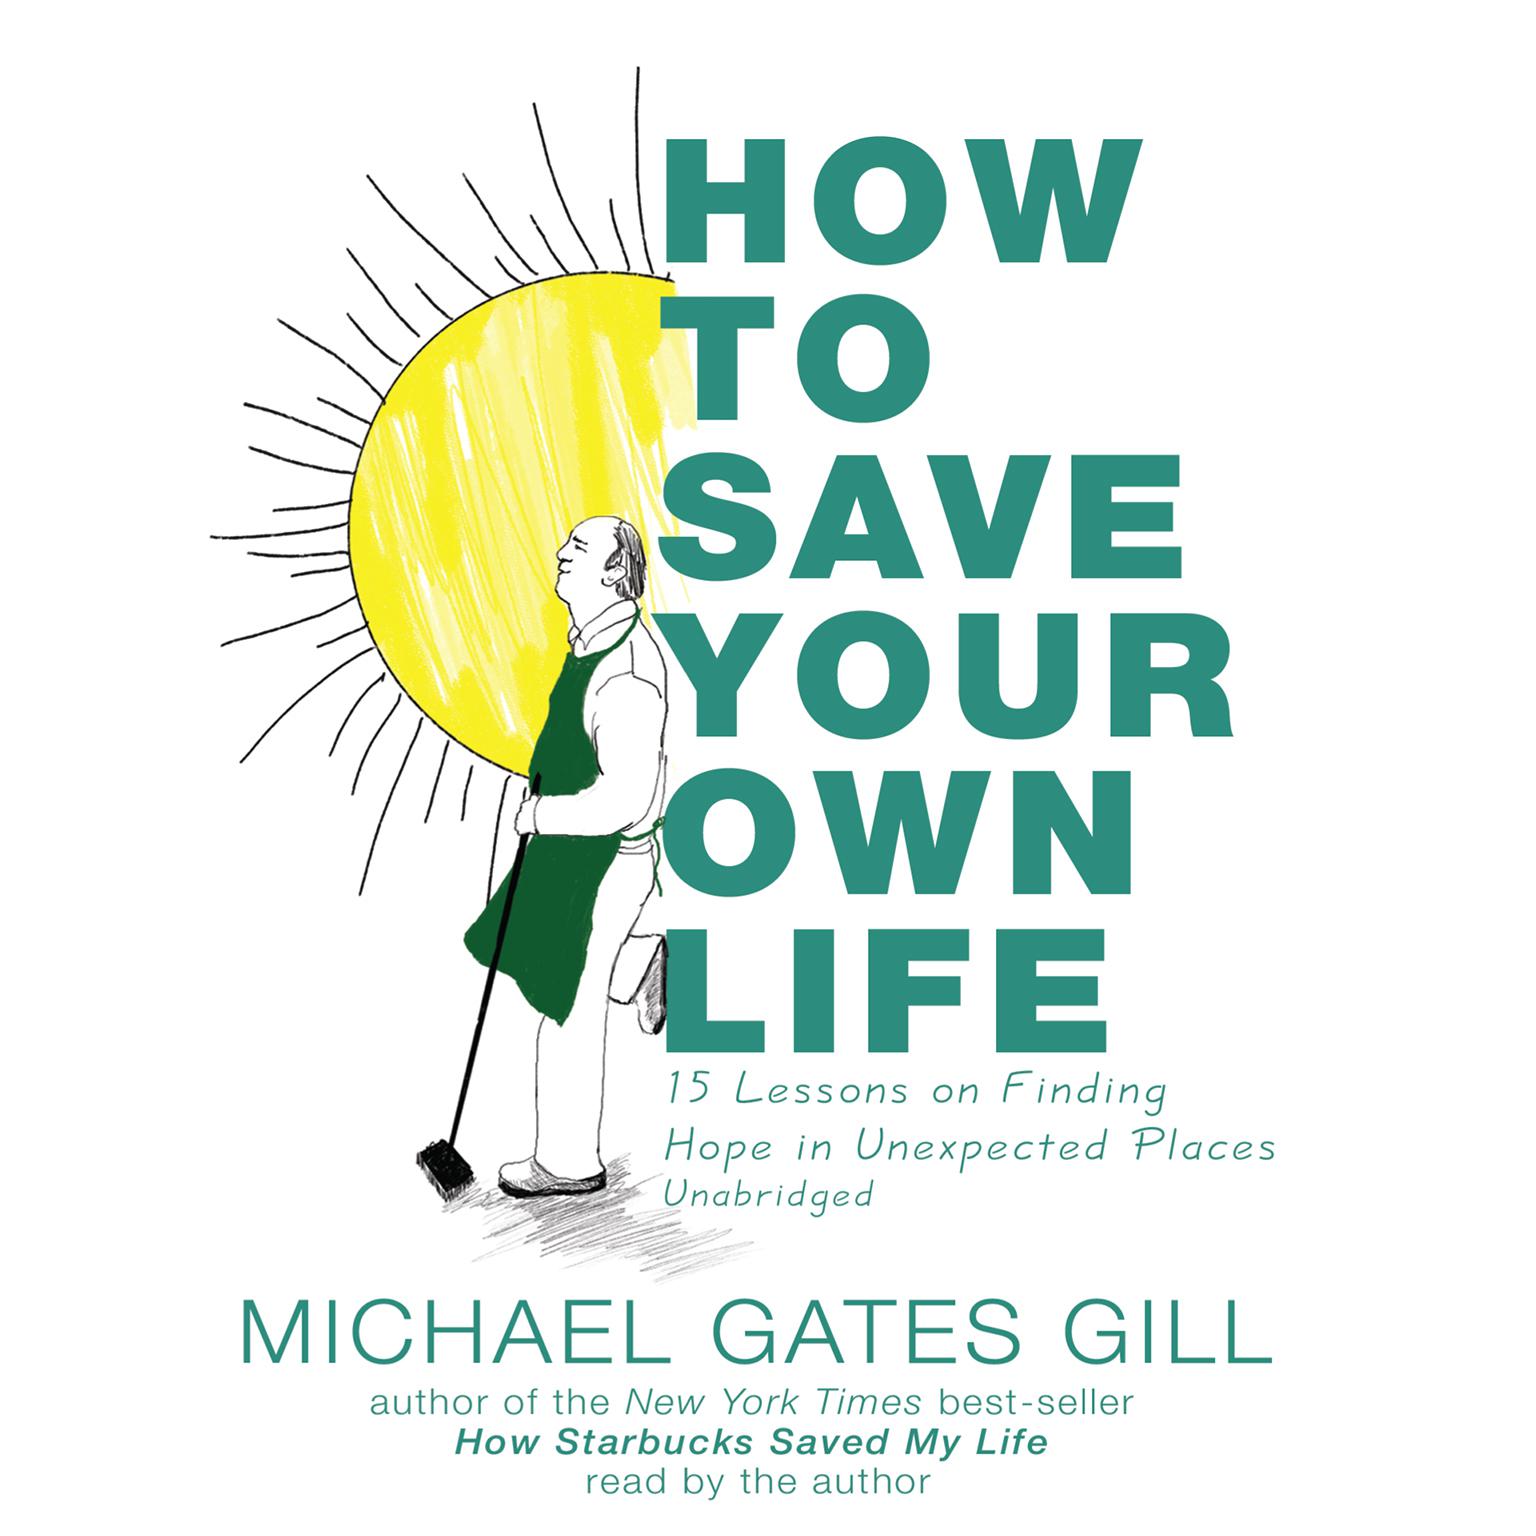 How to Save Your Own Life: 15 Lessons on Finding Hope in Unexpected Places Audiobook, by Michael Gates Gill